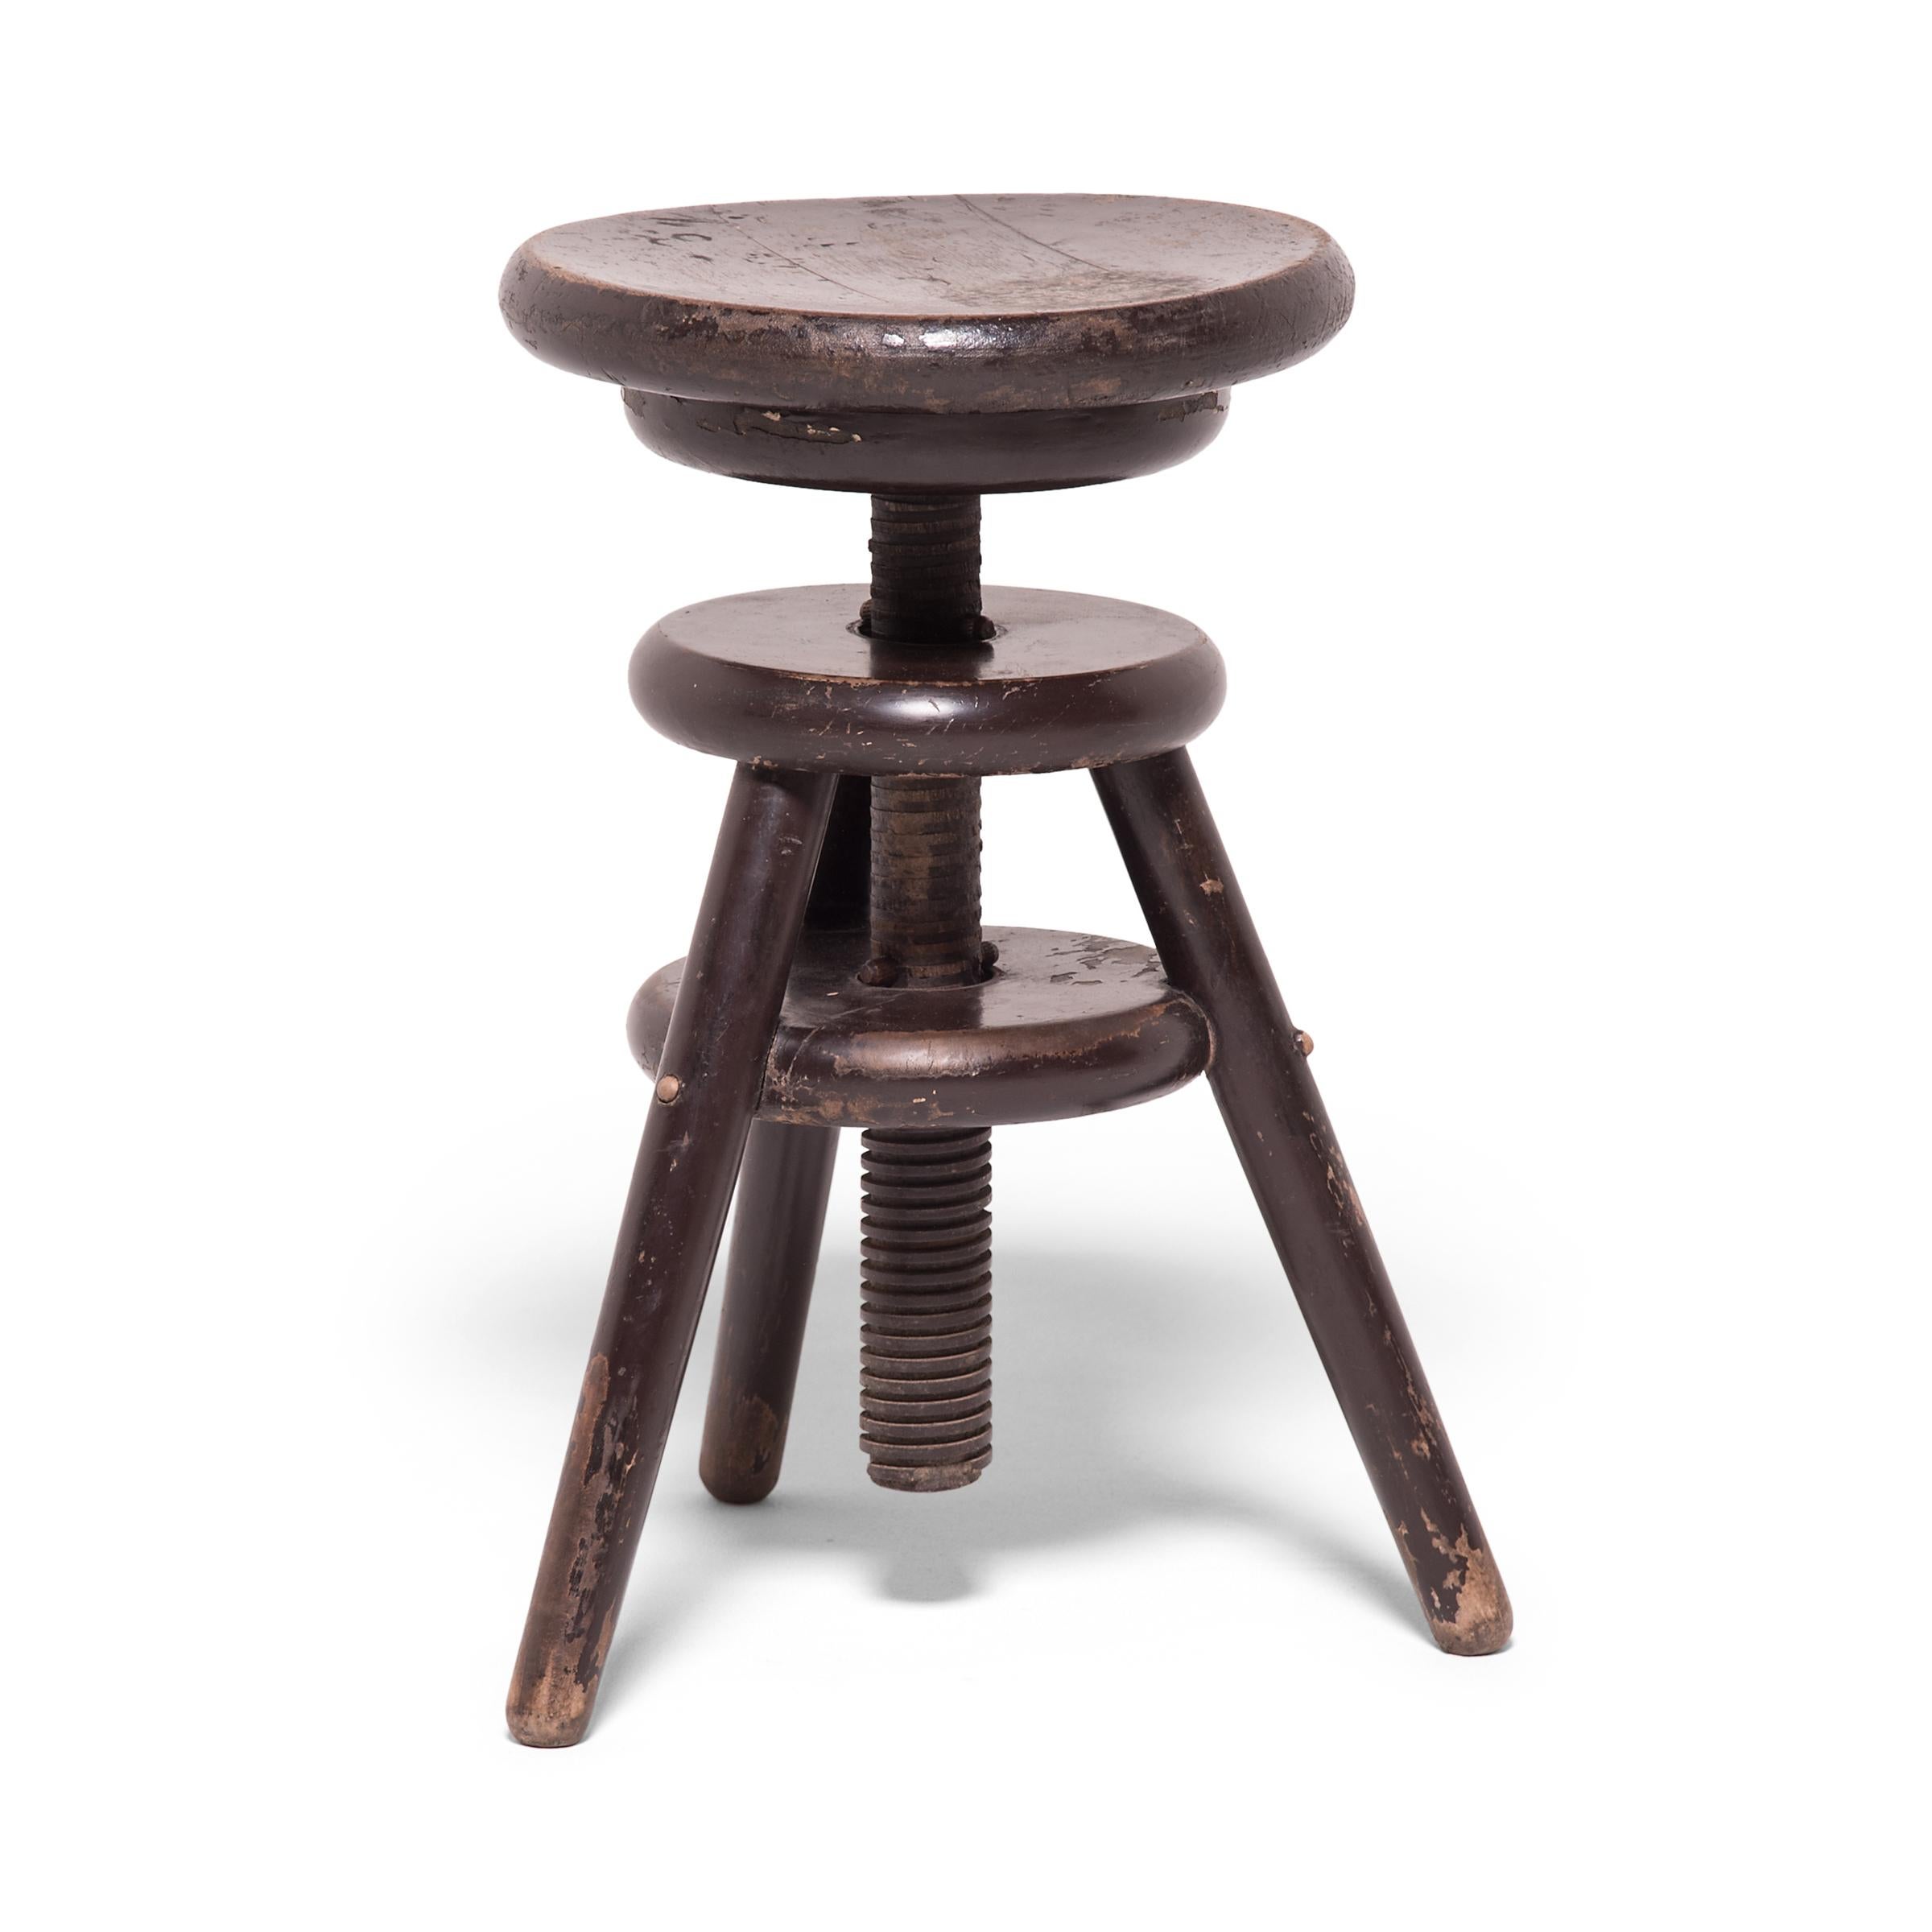 It is unusual to see an early 20th-century Chinese round stool designed to be adjustable. The artisan who created this inventive stool hand-carved the cylindrical center post for easy adjustment. Although this stool can no longer swivel, it remains